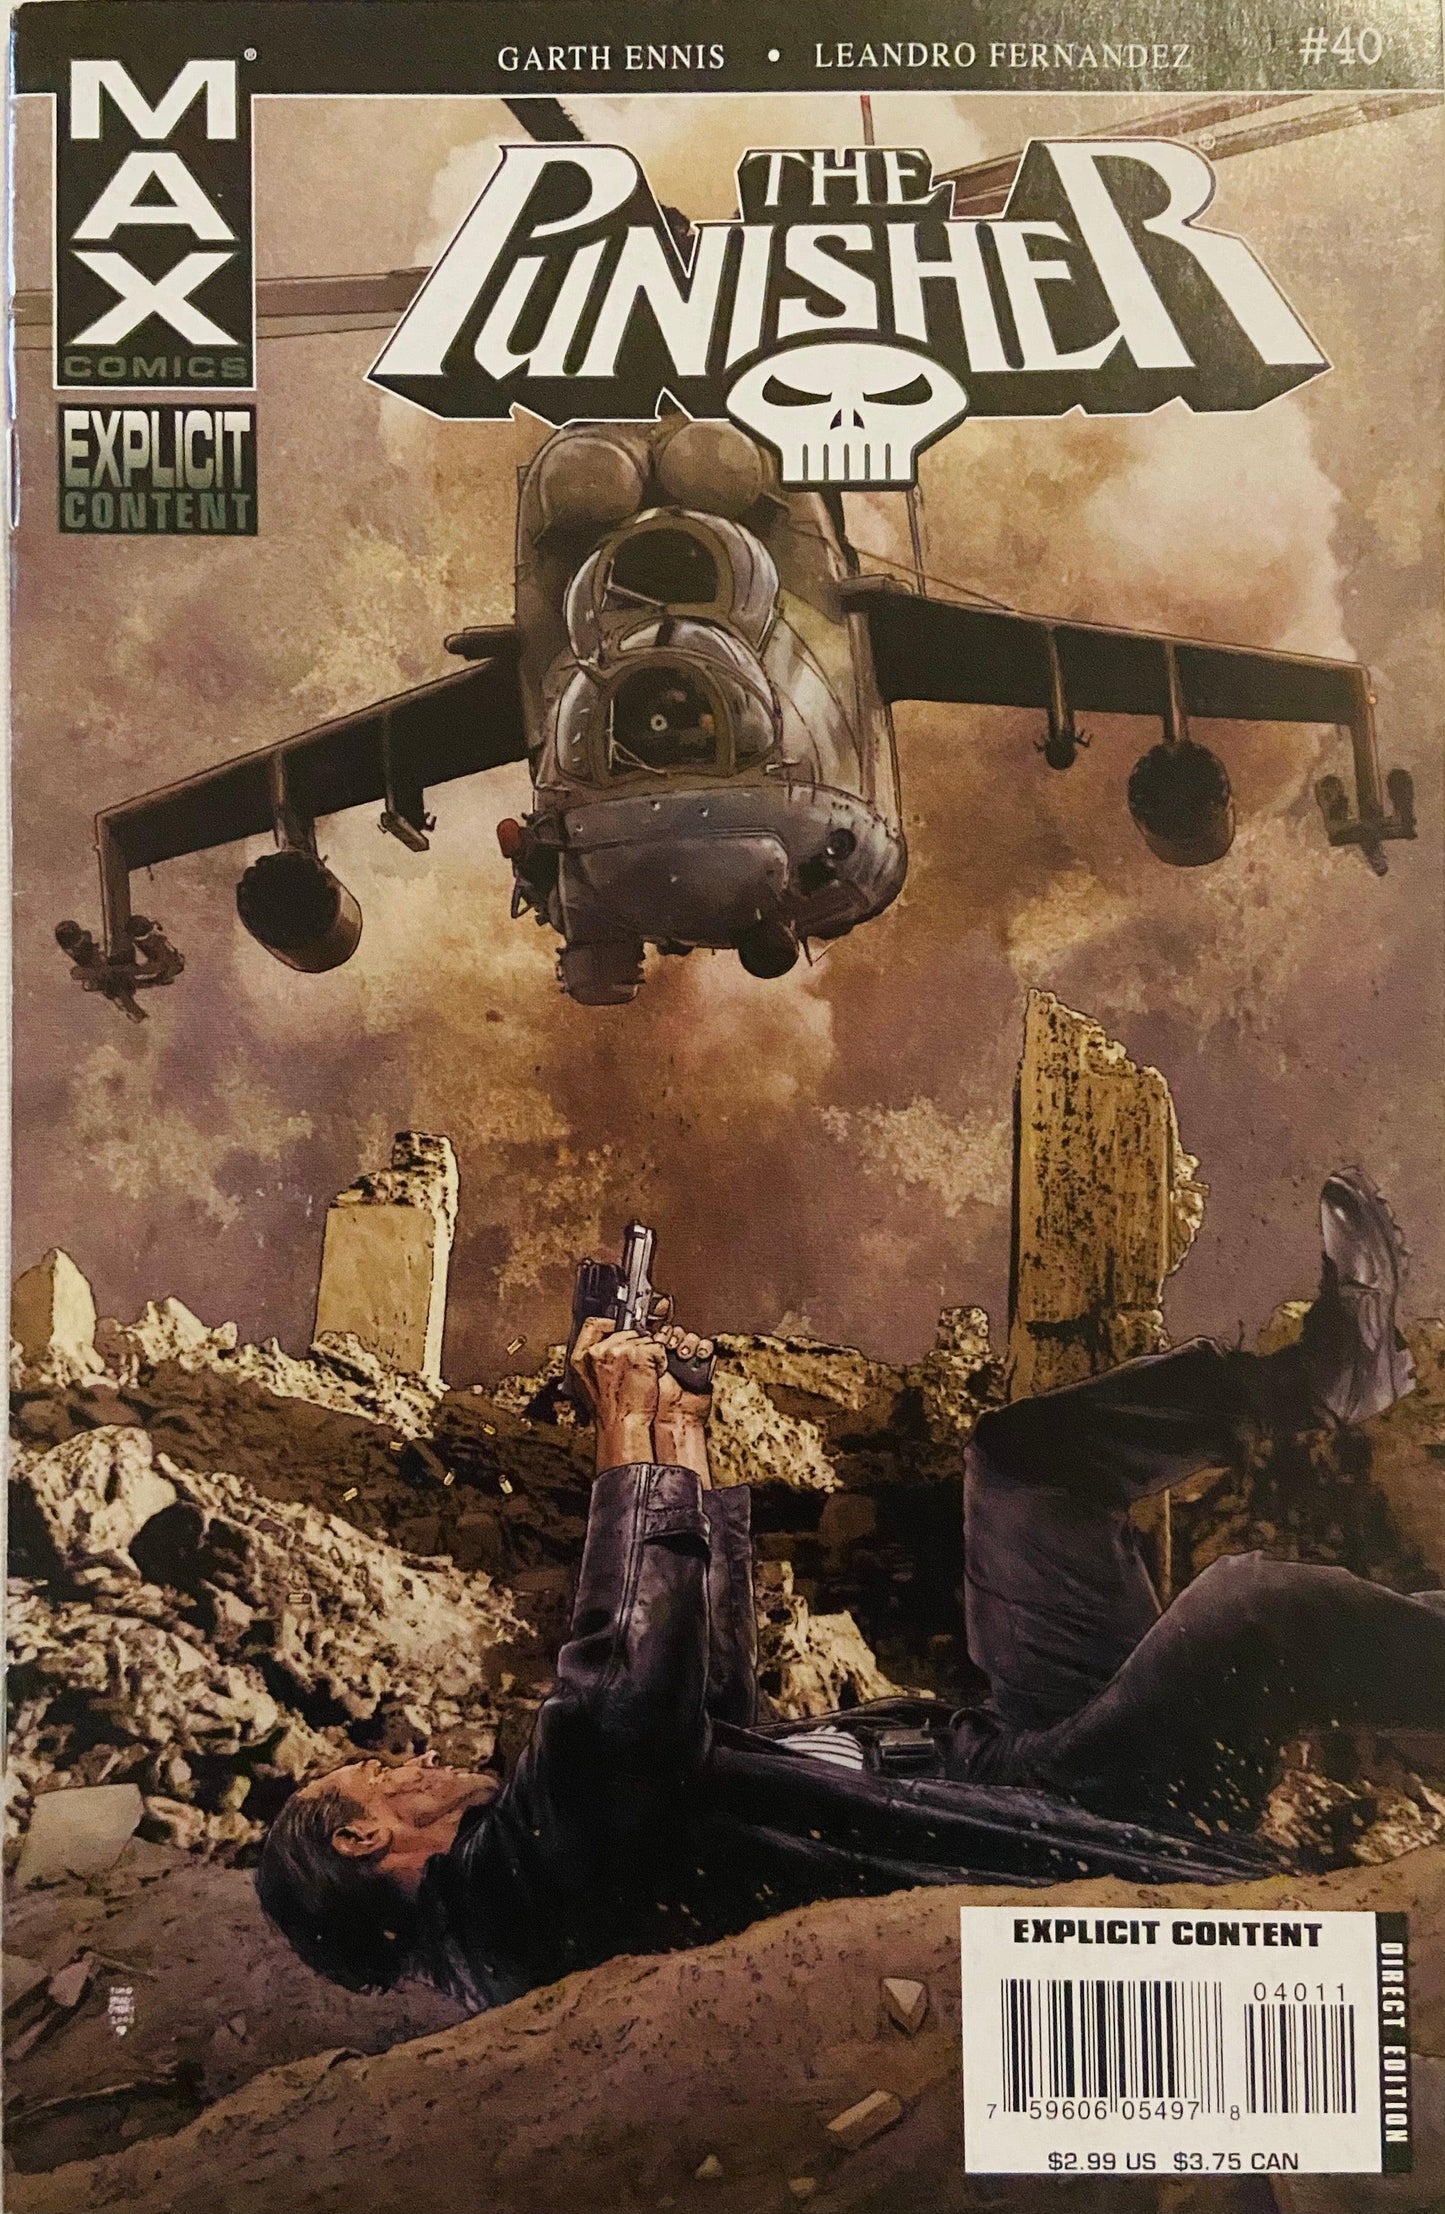 The Punisher #40 - HolyGrail Comix